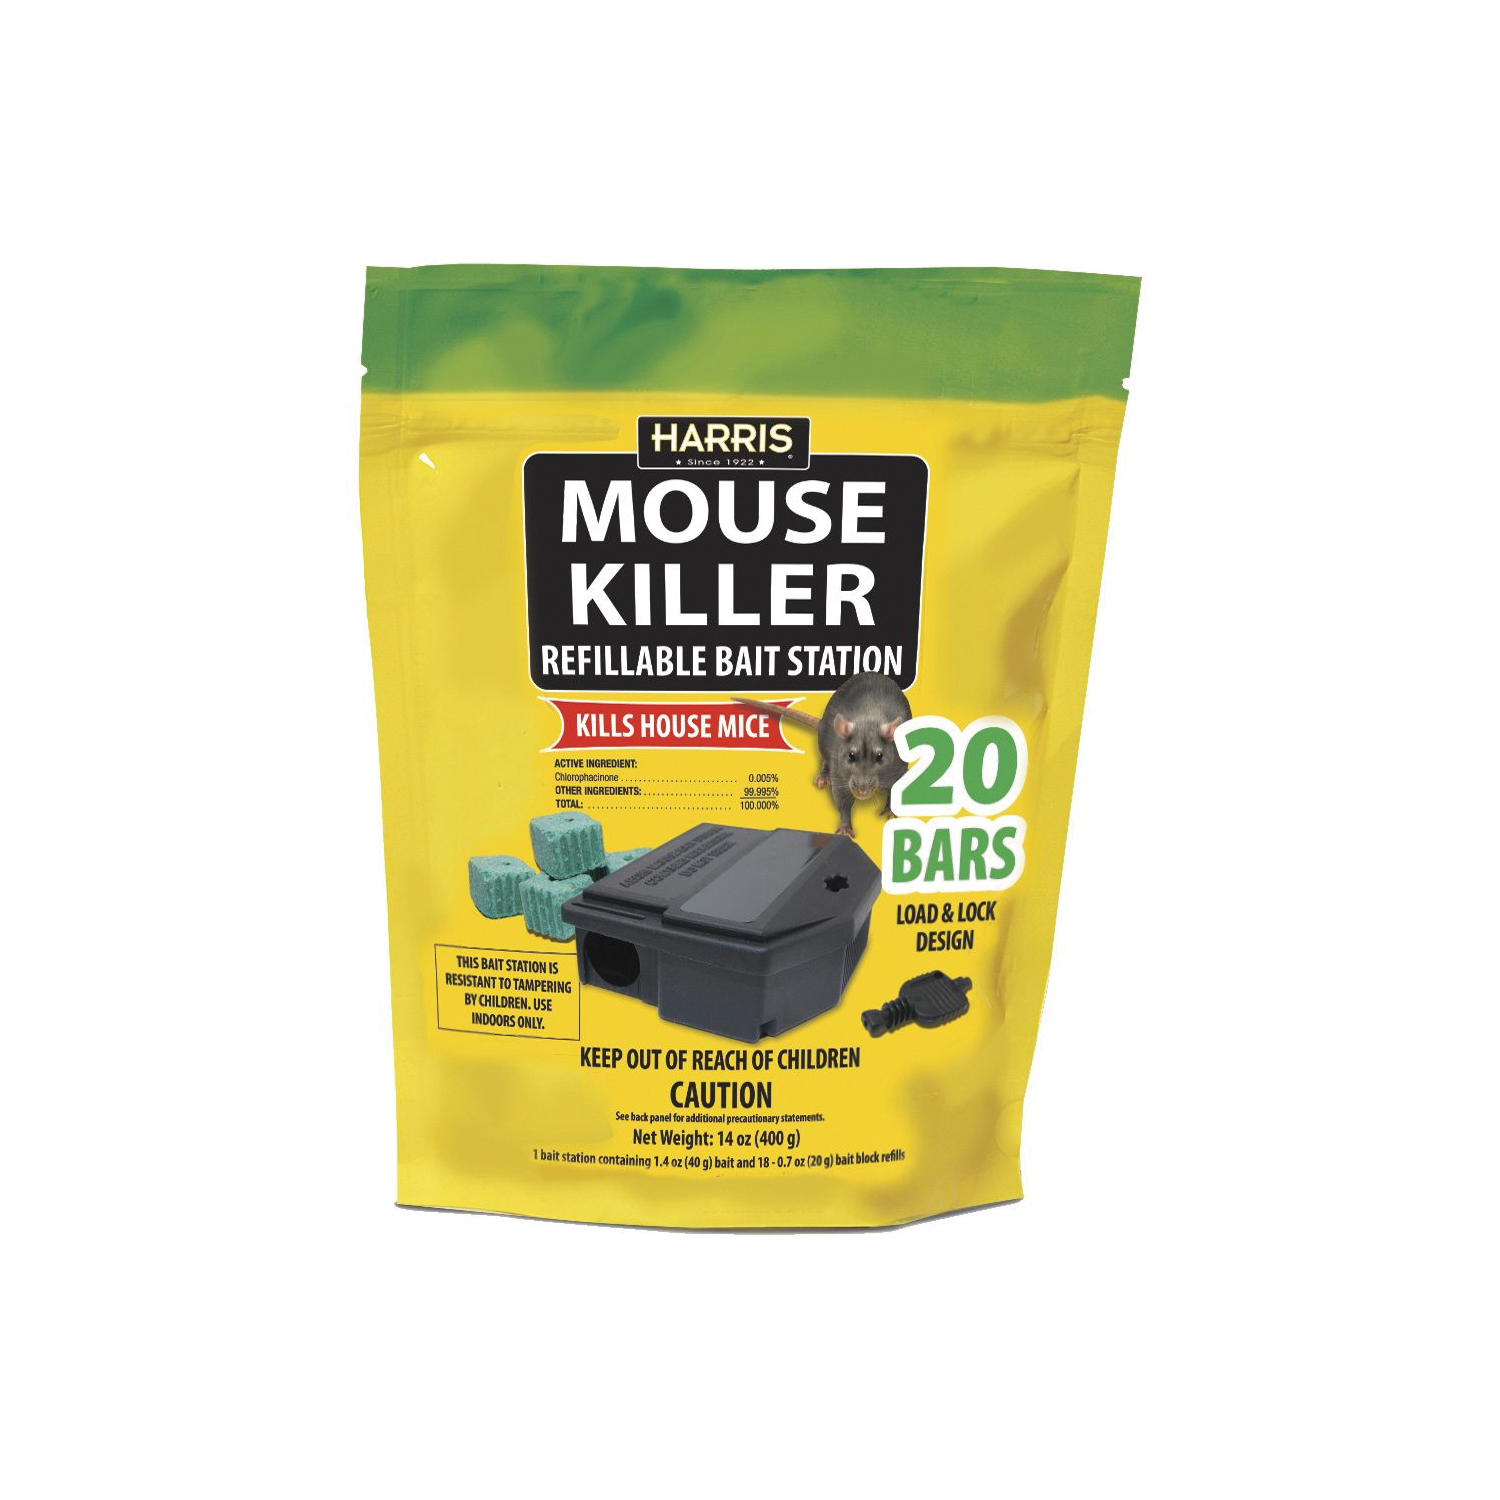 Harris Mouse Killer Bars and Locking Rat and Mouse Refillable Bait Station Value Pack